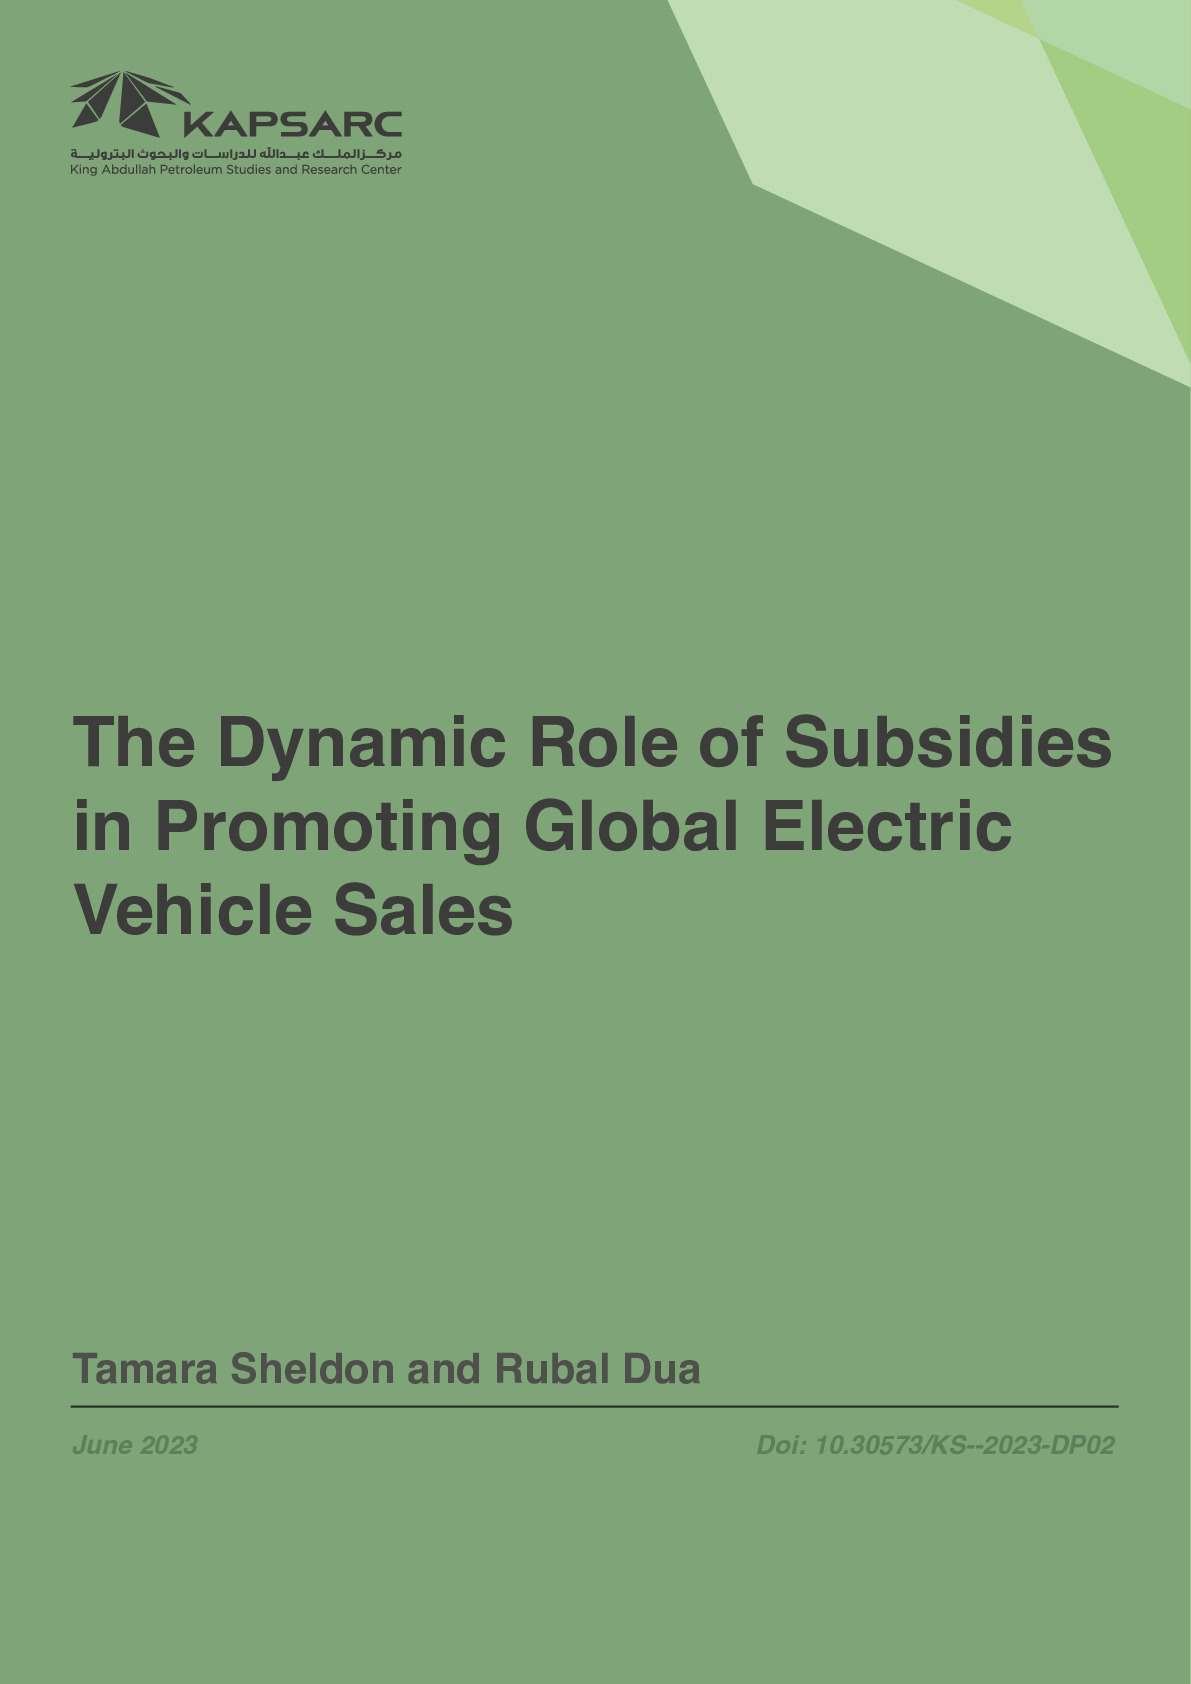 The Dynamic Role of Subsidies in Promoting Global Electric Vehicle Sales